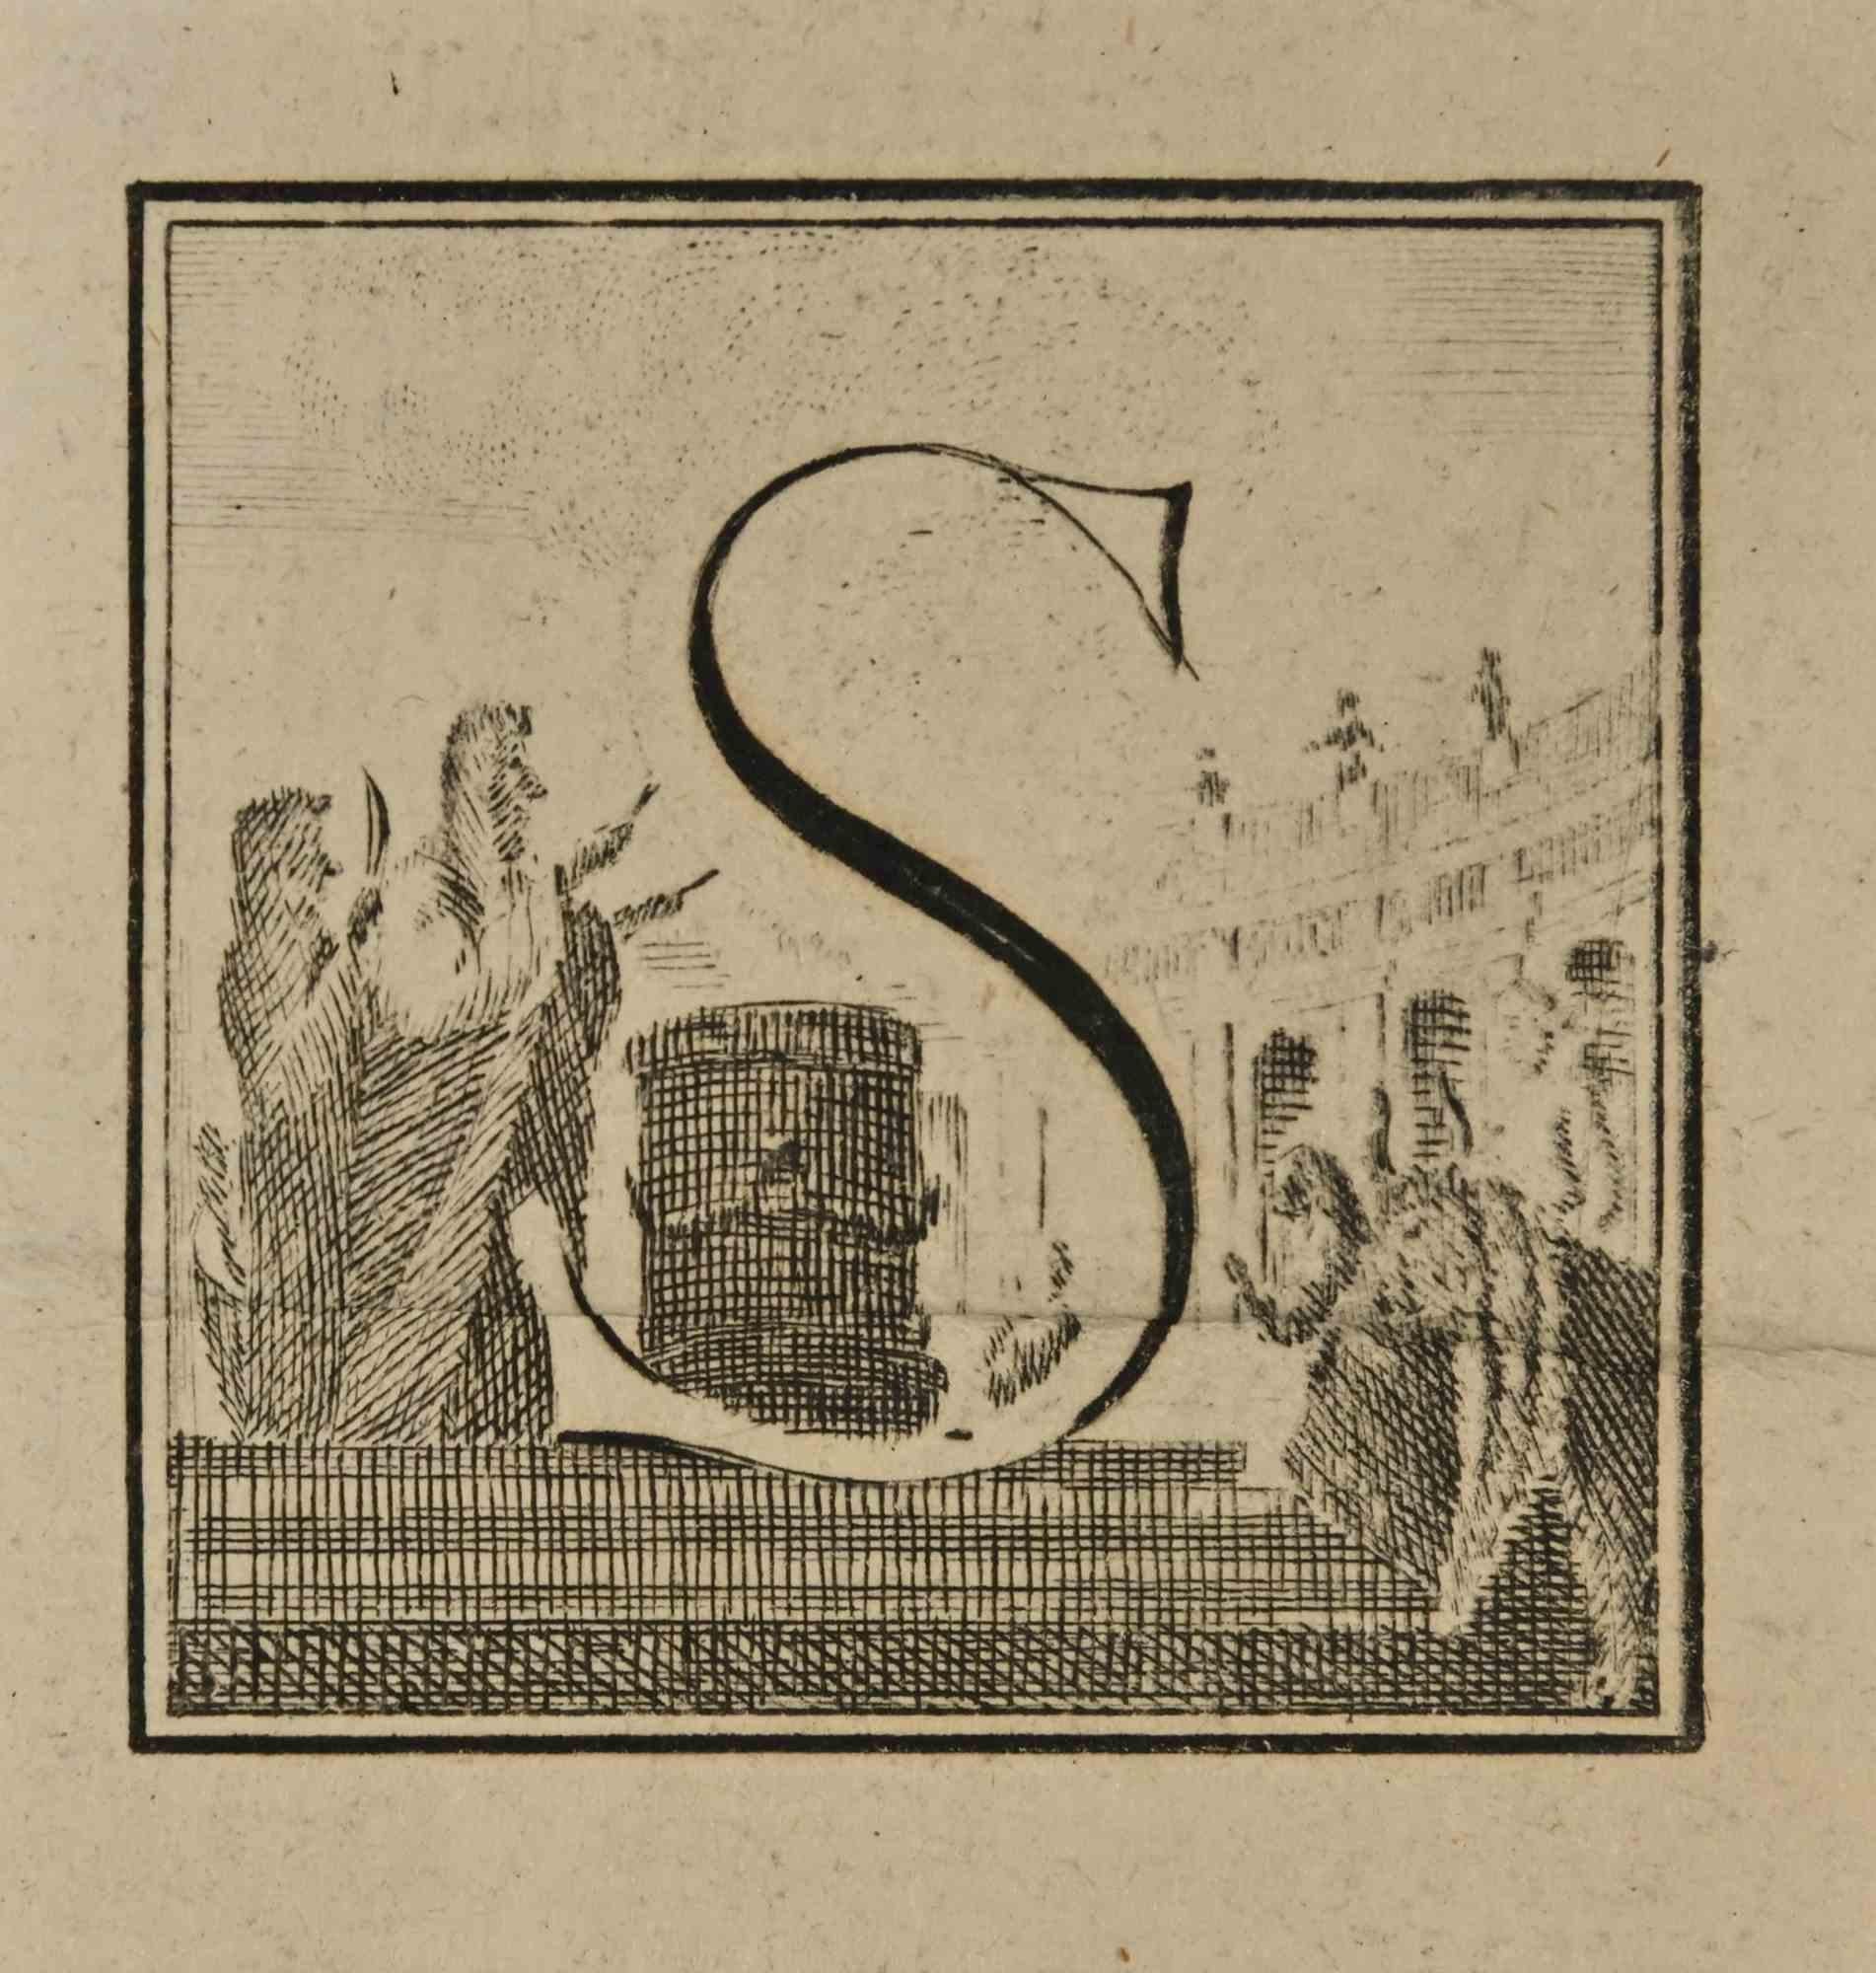 Letter of the Alphabet S,  from the series "Antiquities of Herculaneum", is an etching on paper realized by Luigi Vanvitelli in the 18th century.

Good conditions with folding.

The etching belongs to the print suite “Antiquities of Herculaneum